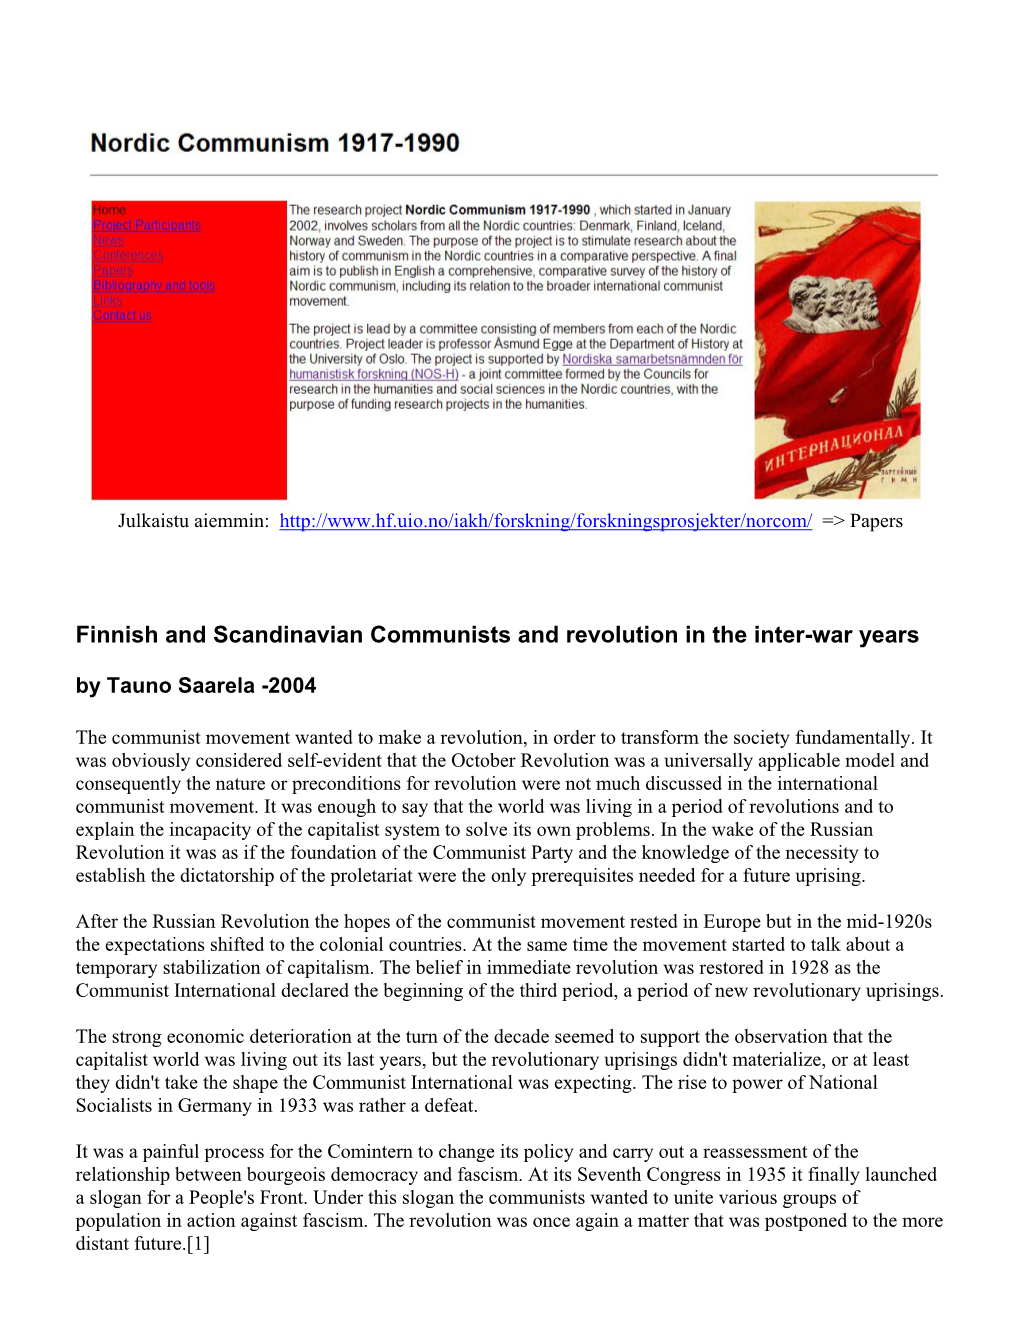 Finnish and Scandinavian Communists and Revolution in the Inter-War Years by Tauno Saarela -2004